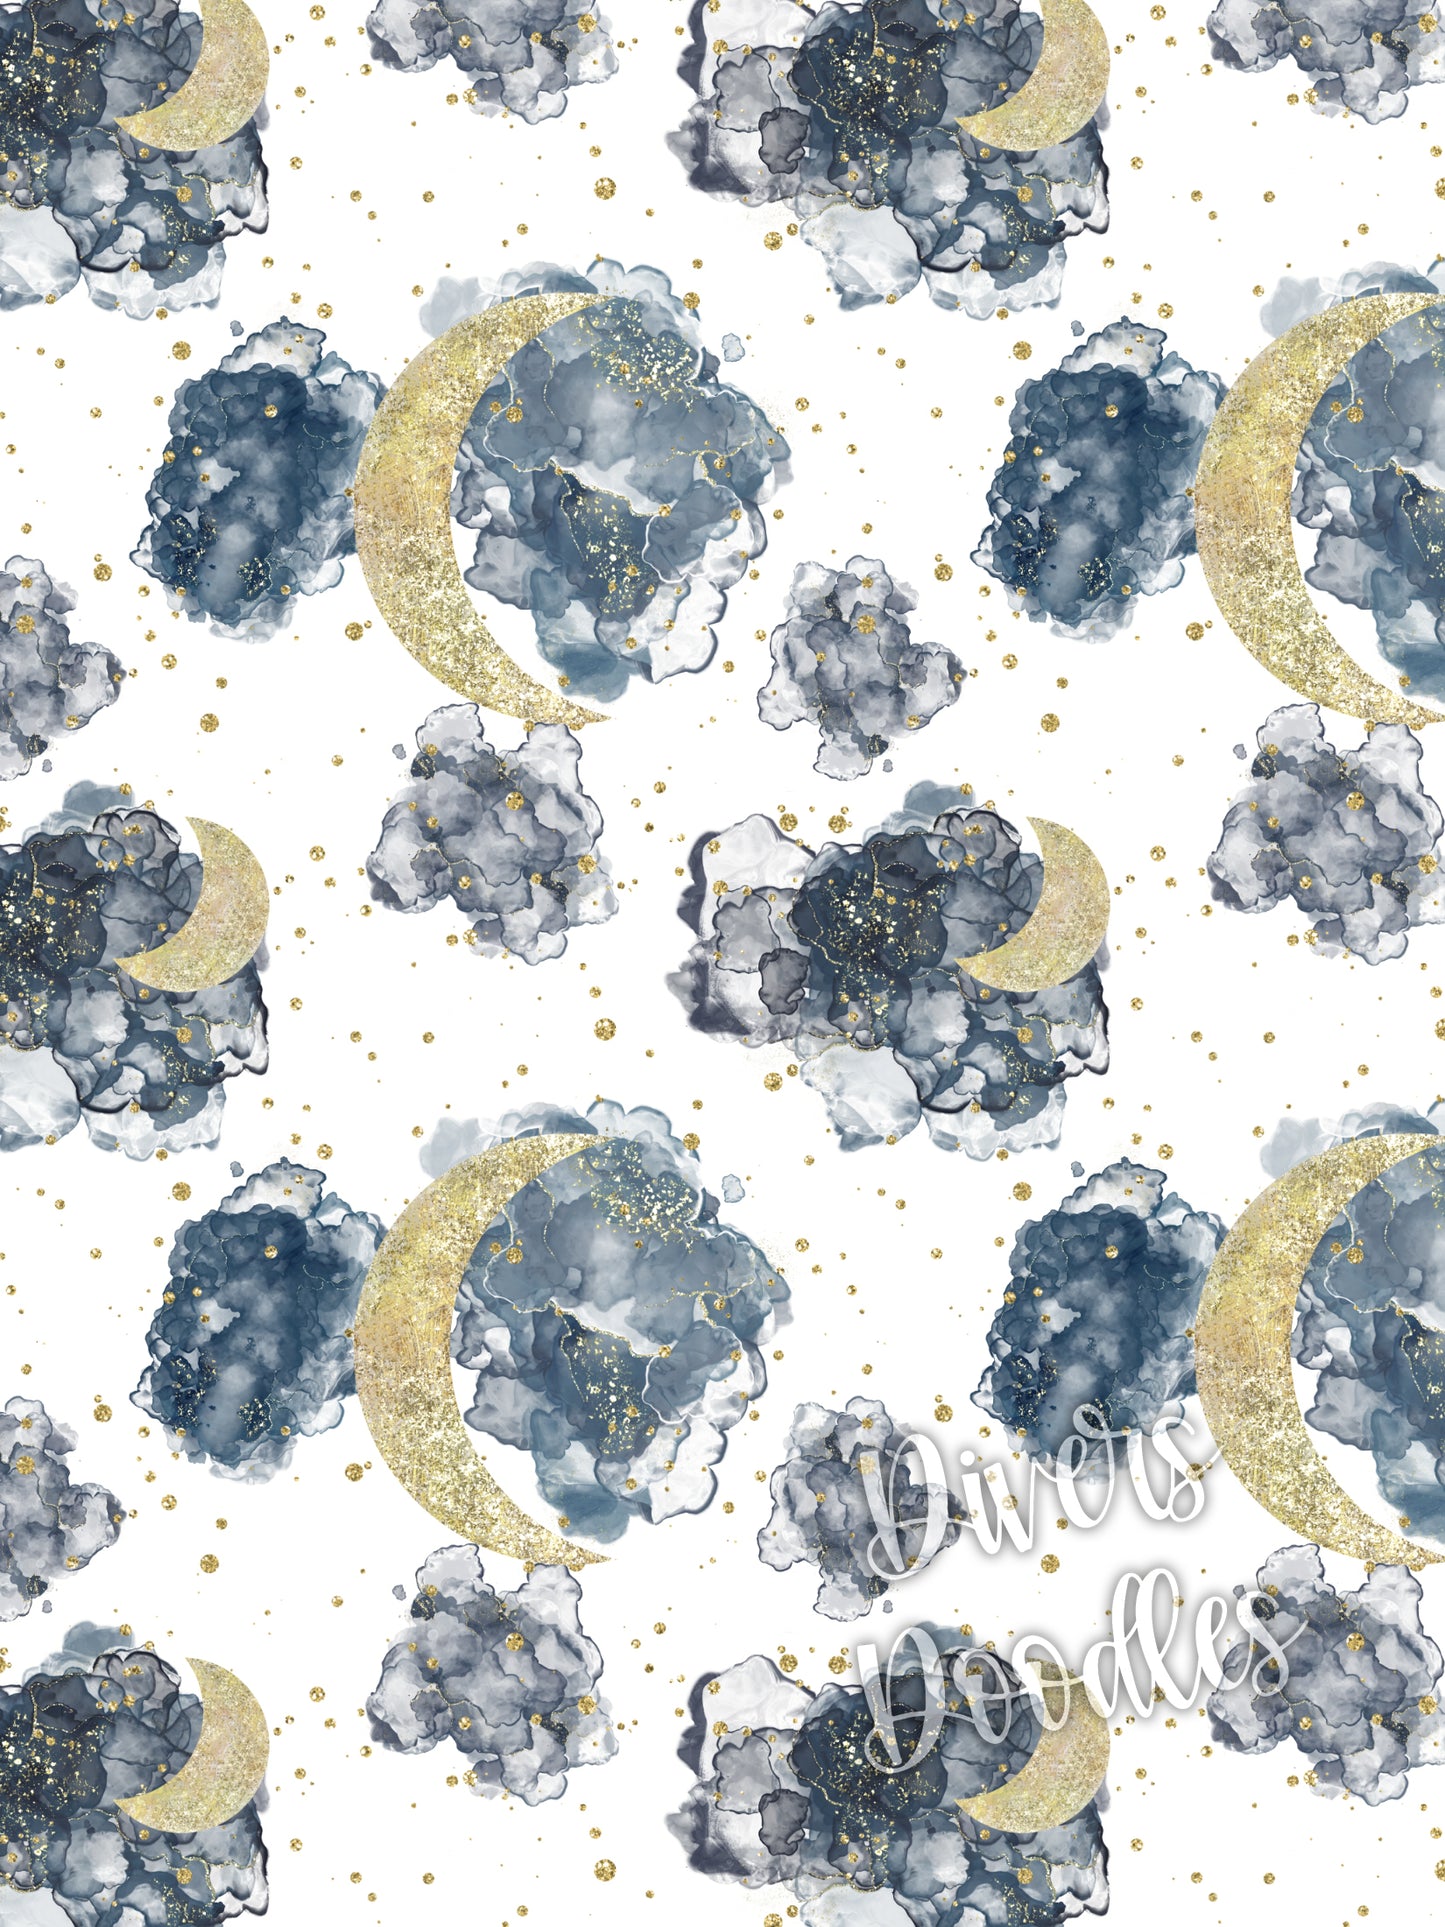 Glitter Moon and Stars Seamless Pattern, Alcohol Ink Digital Paper and Fabric Design. Free Commercial Use.